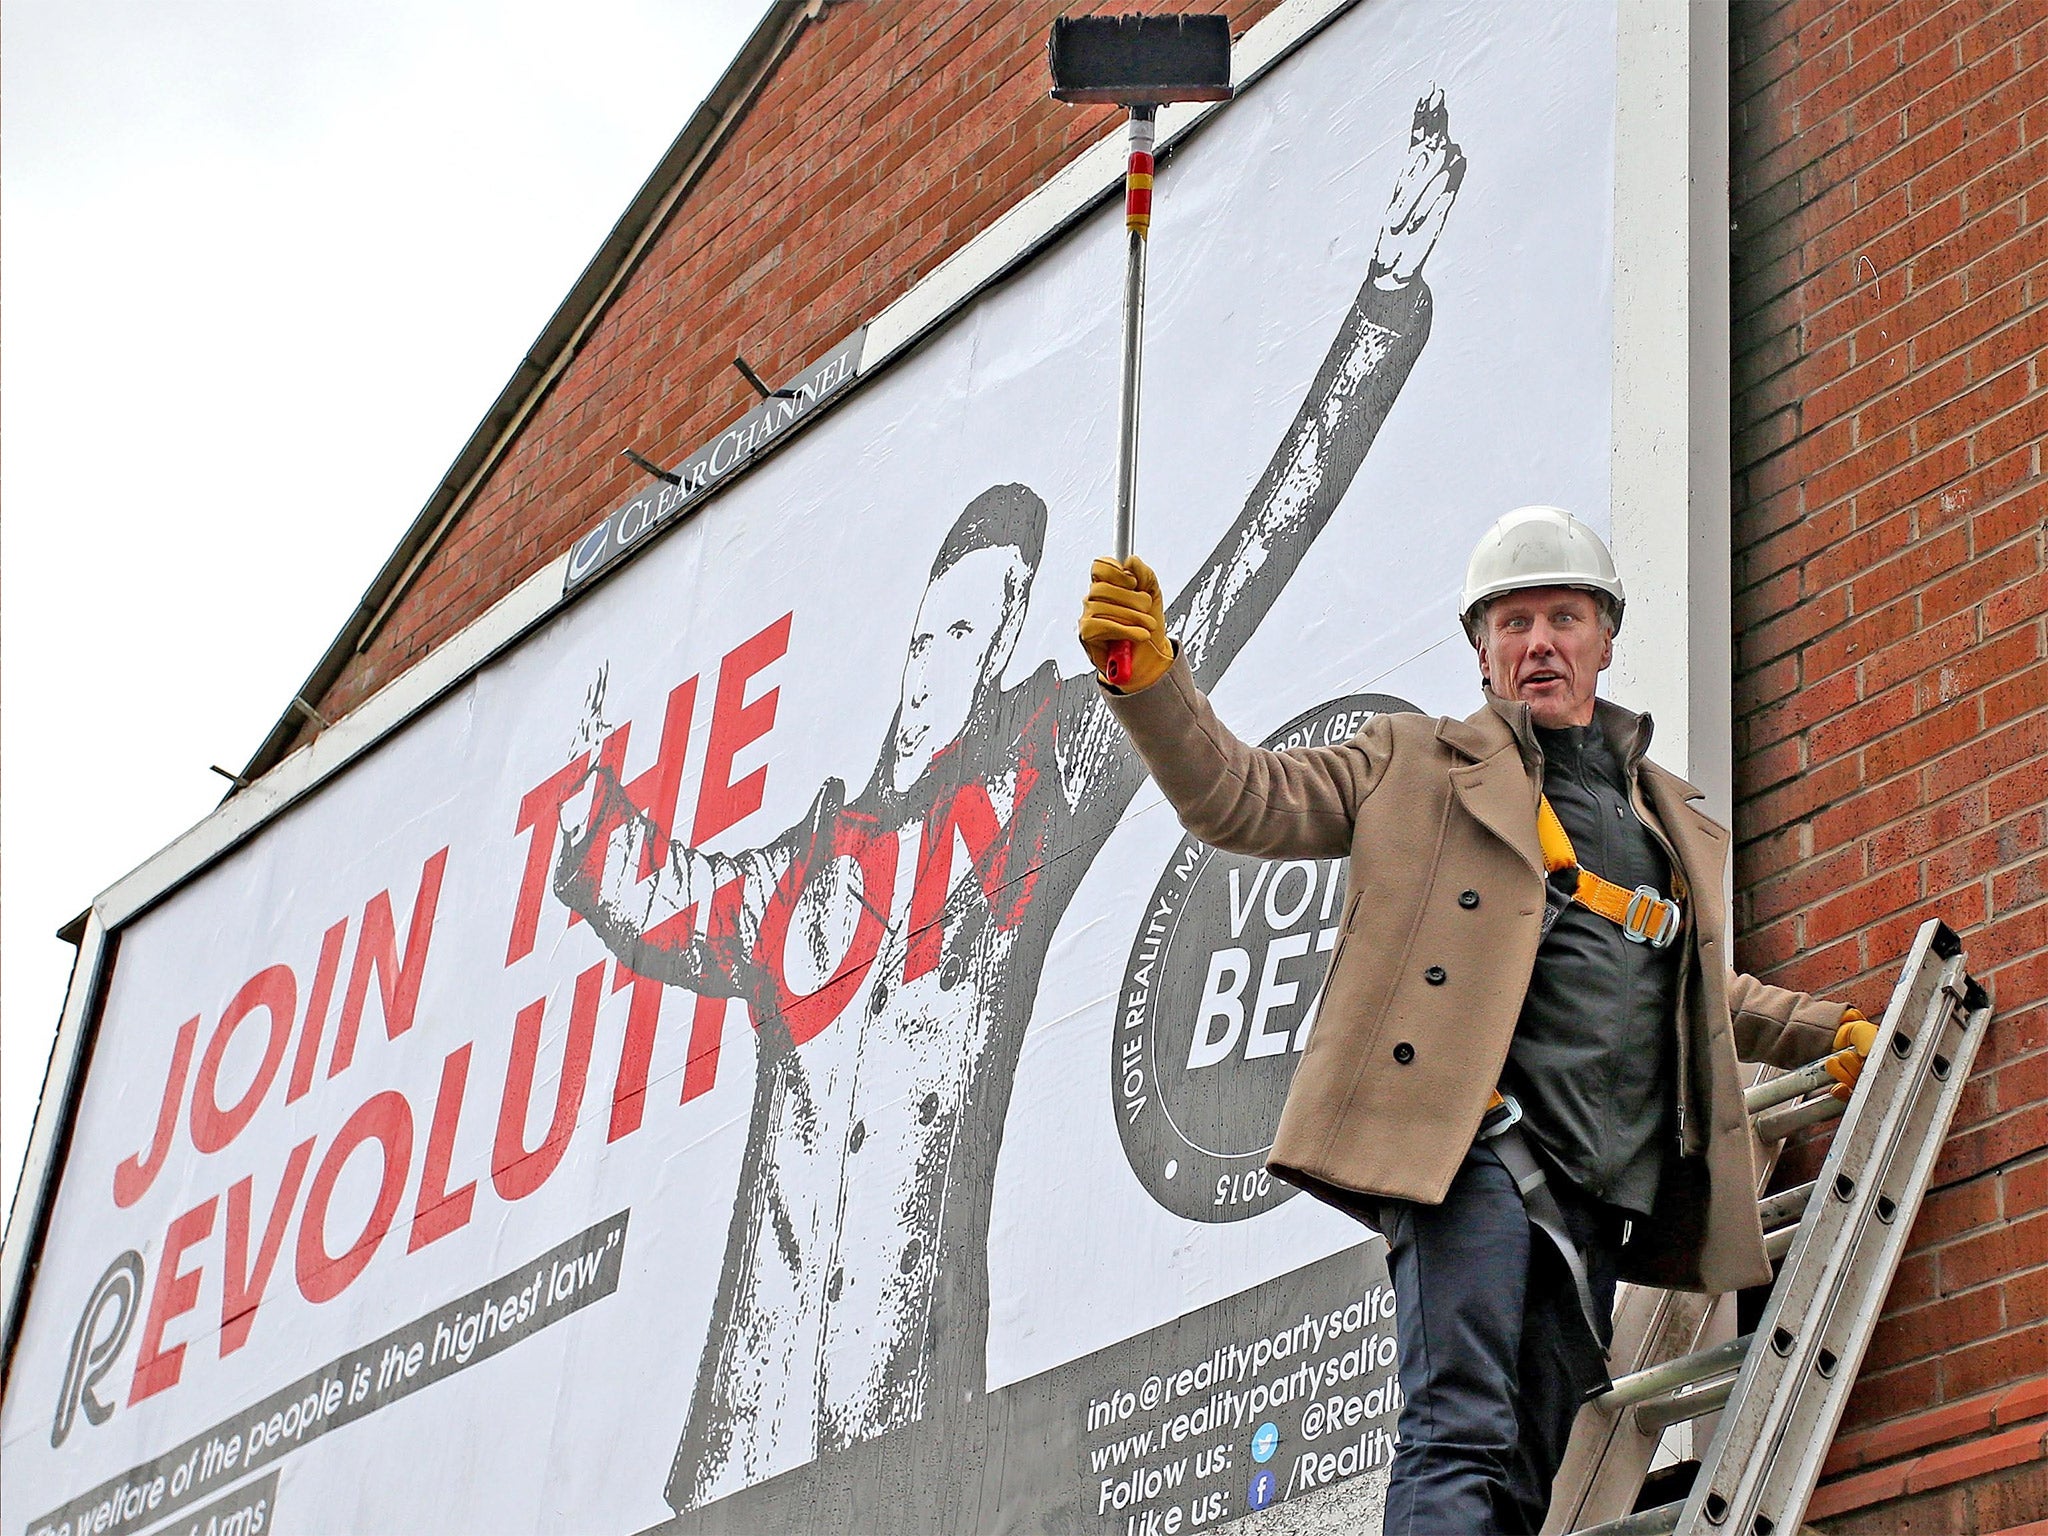 Bez launches his Reality Party outside Salford Cathedral in Greater Manchester, on Monday